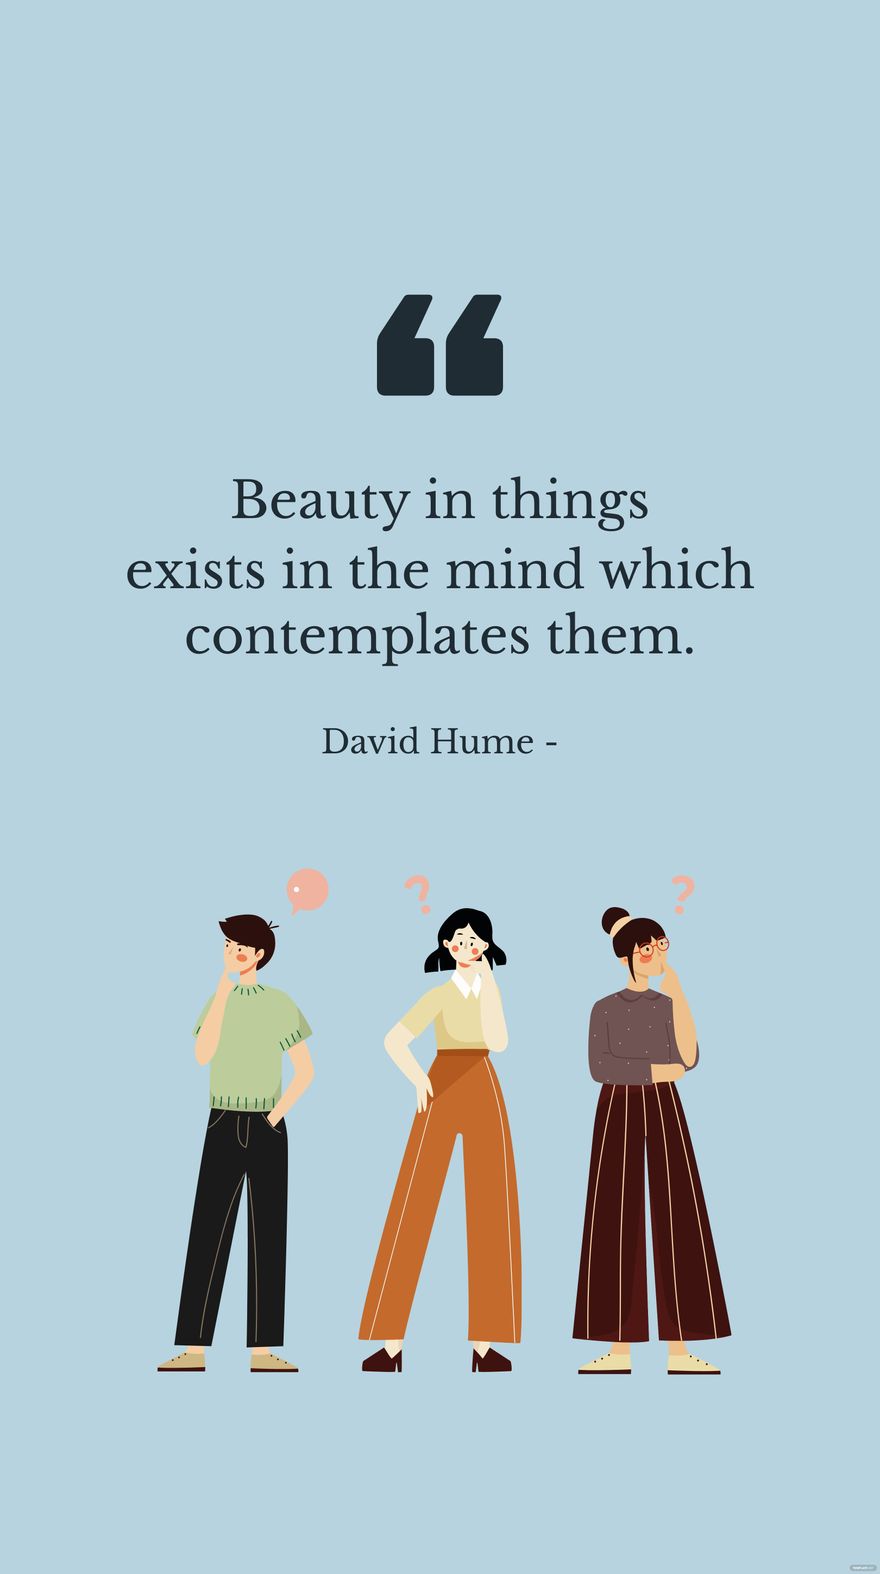 David Hume - Beauty in things exists in the mind which contemplates them.